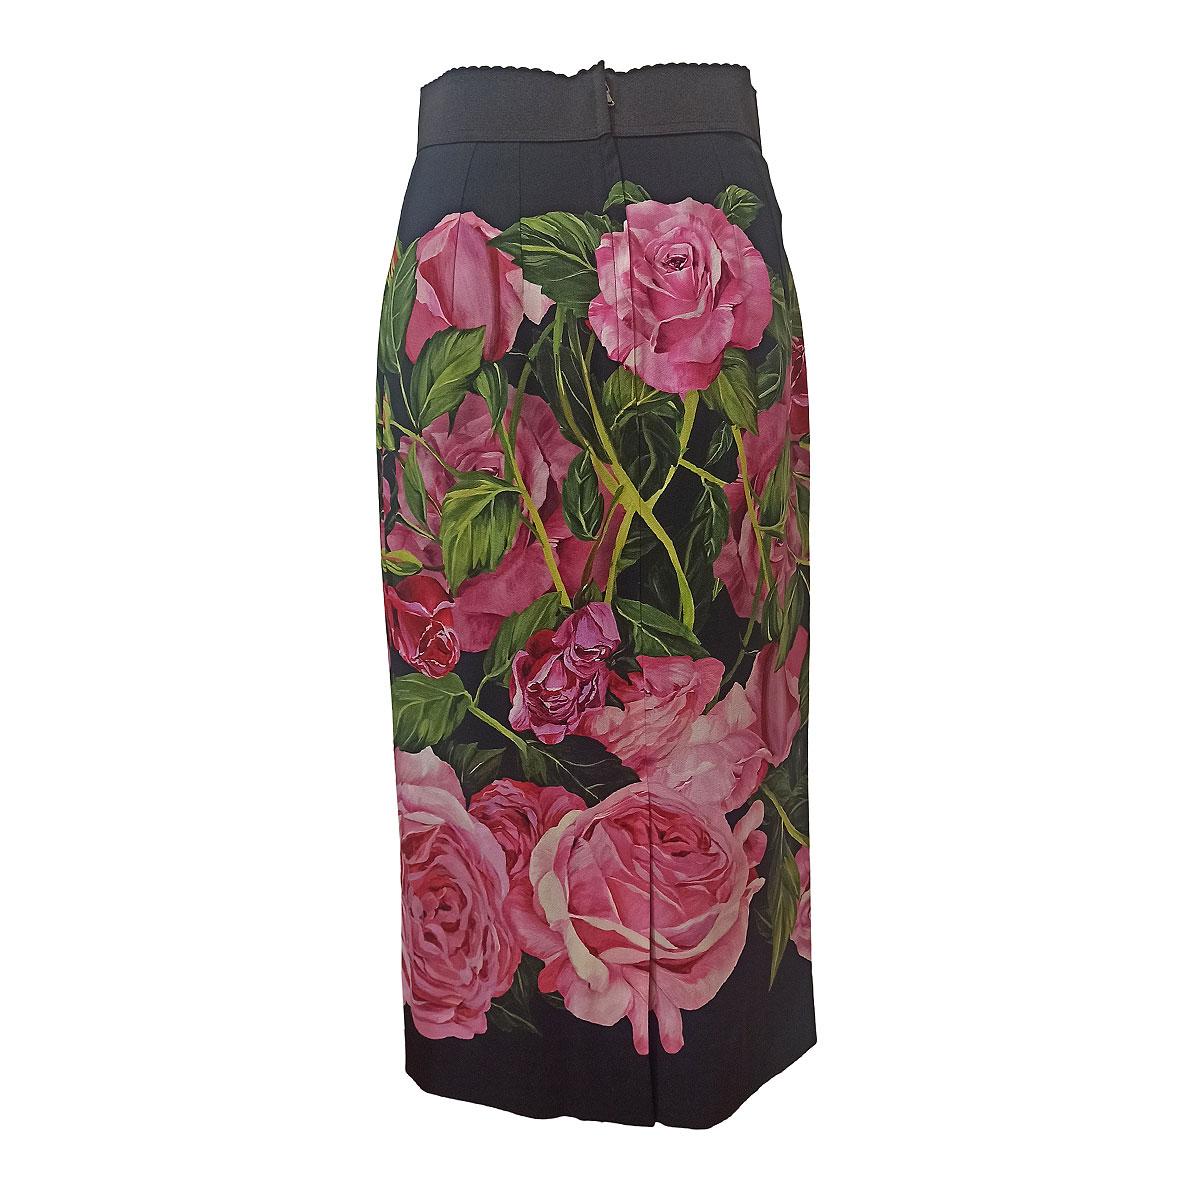 Stunning Dolce & Gabbana printed skirt
Missing composition and size tag
Black color with pink roses fancy
Back zip closure
Total length cm 82 (32,28 inches)
Waist cm 36 (14,17 inches)
Fabric tag removed by previous owner
Worldwide express shipping